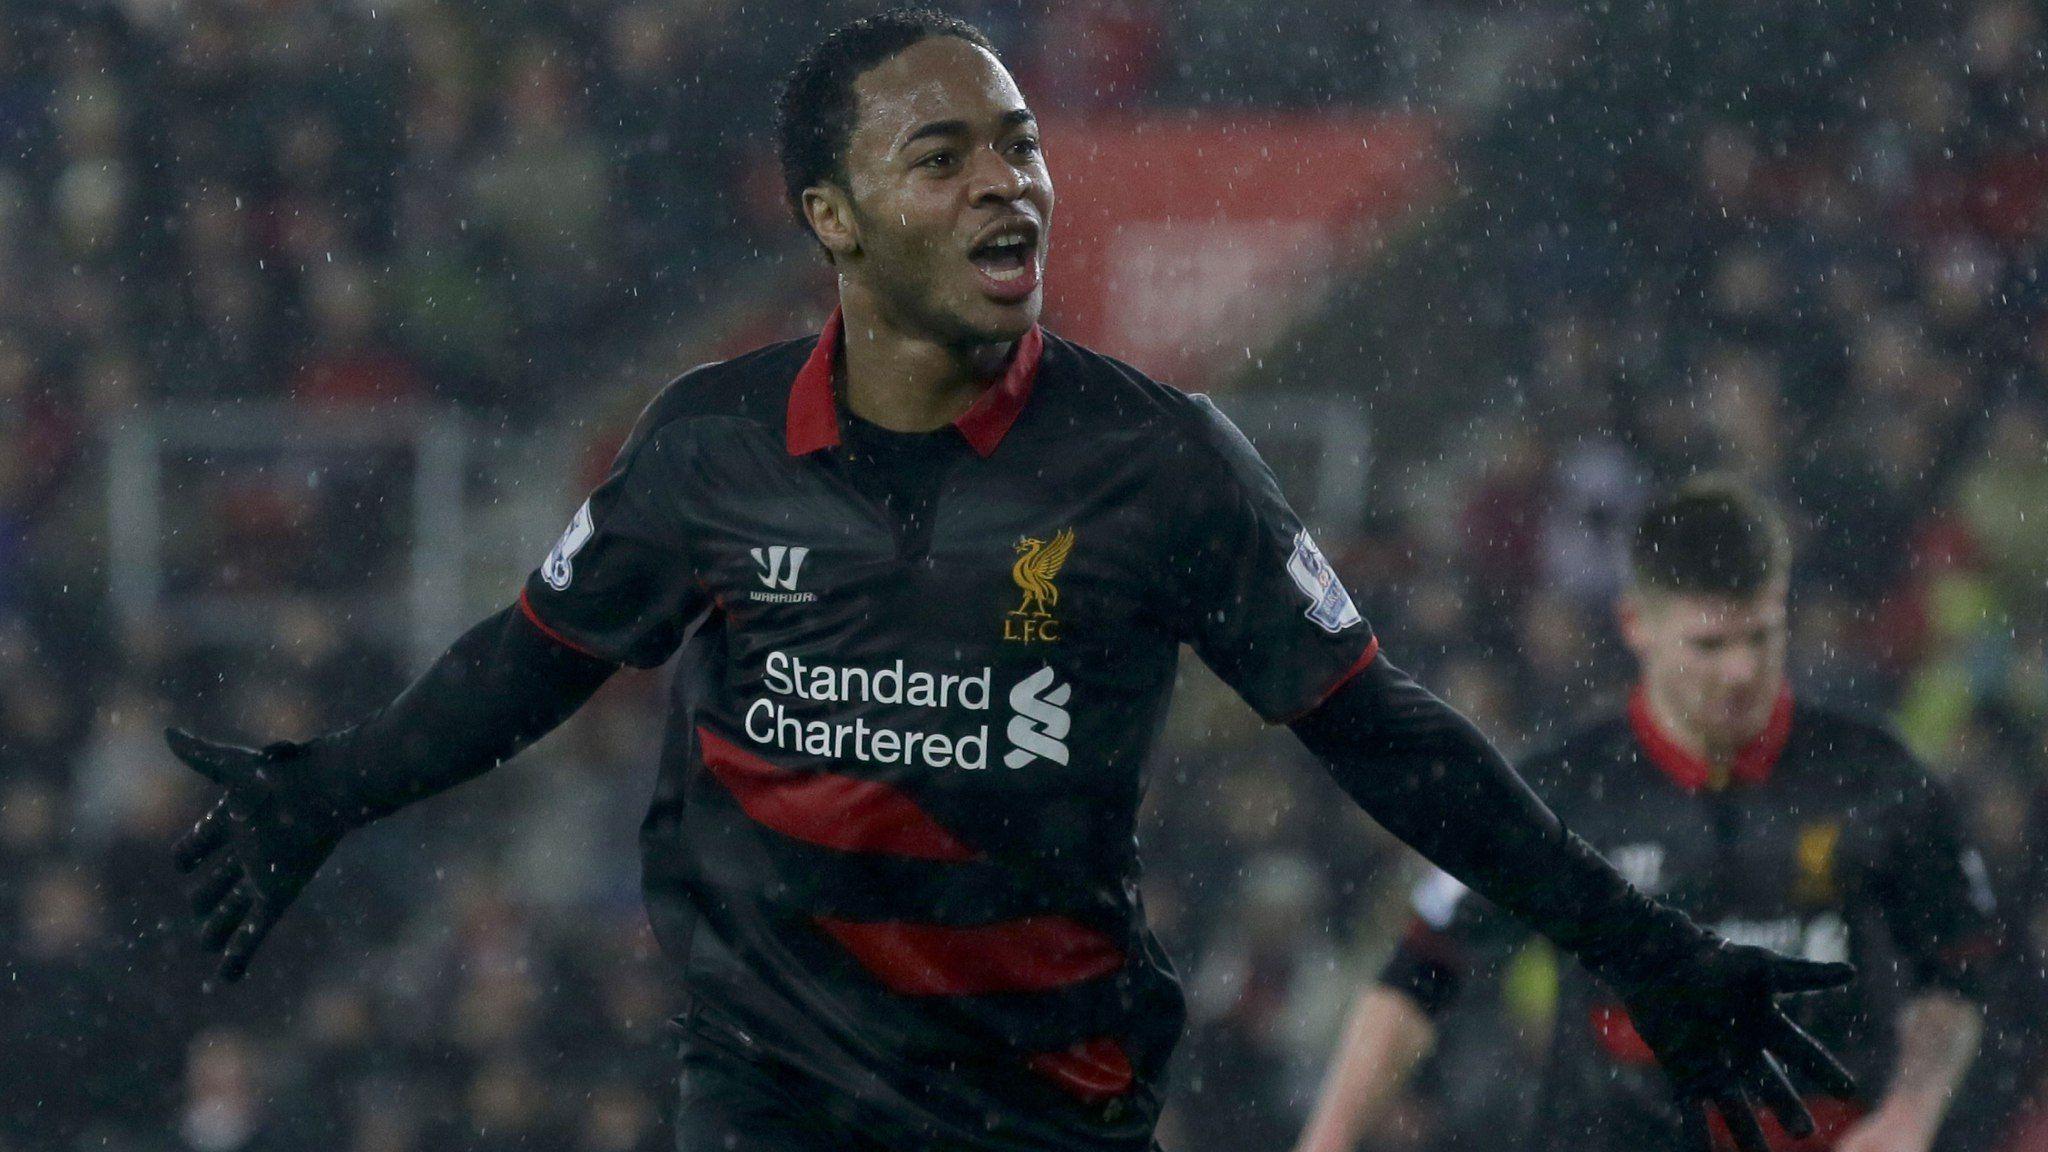 Merseyside Markup: Should Liverpool Pay Raheem Sterling What He